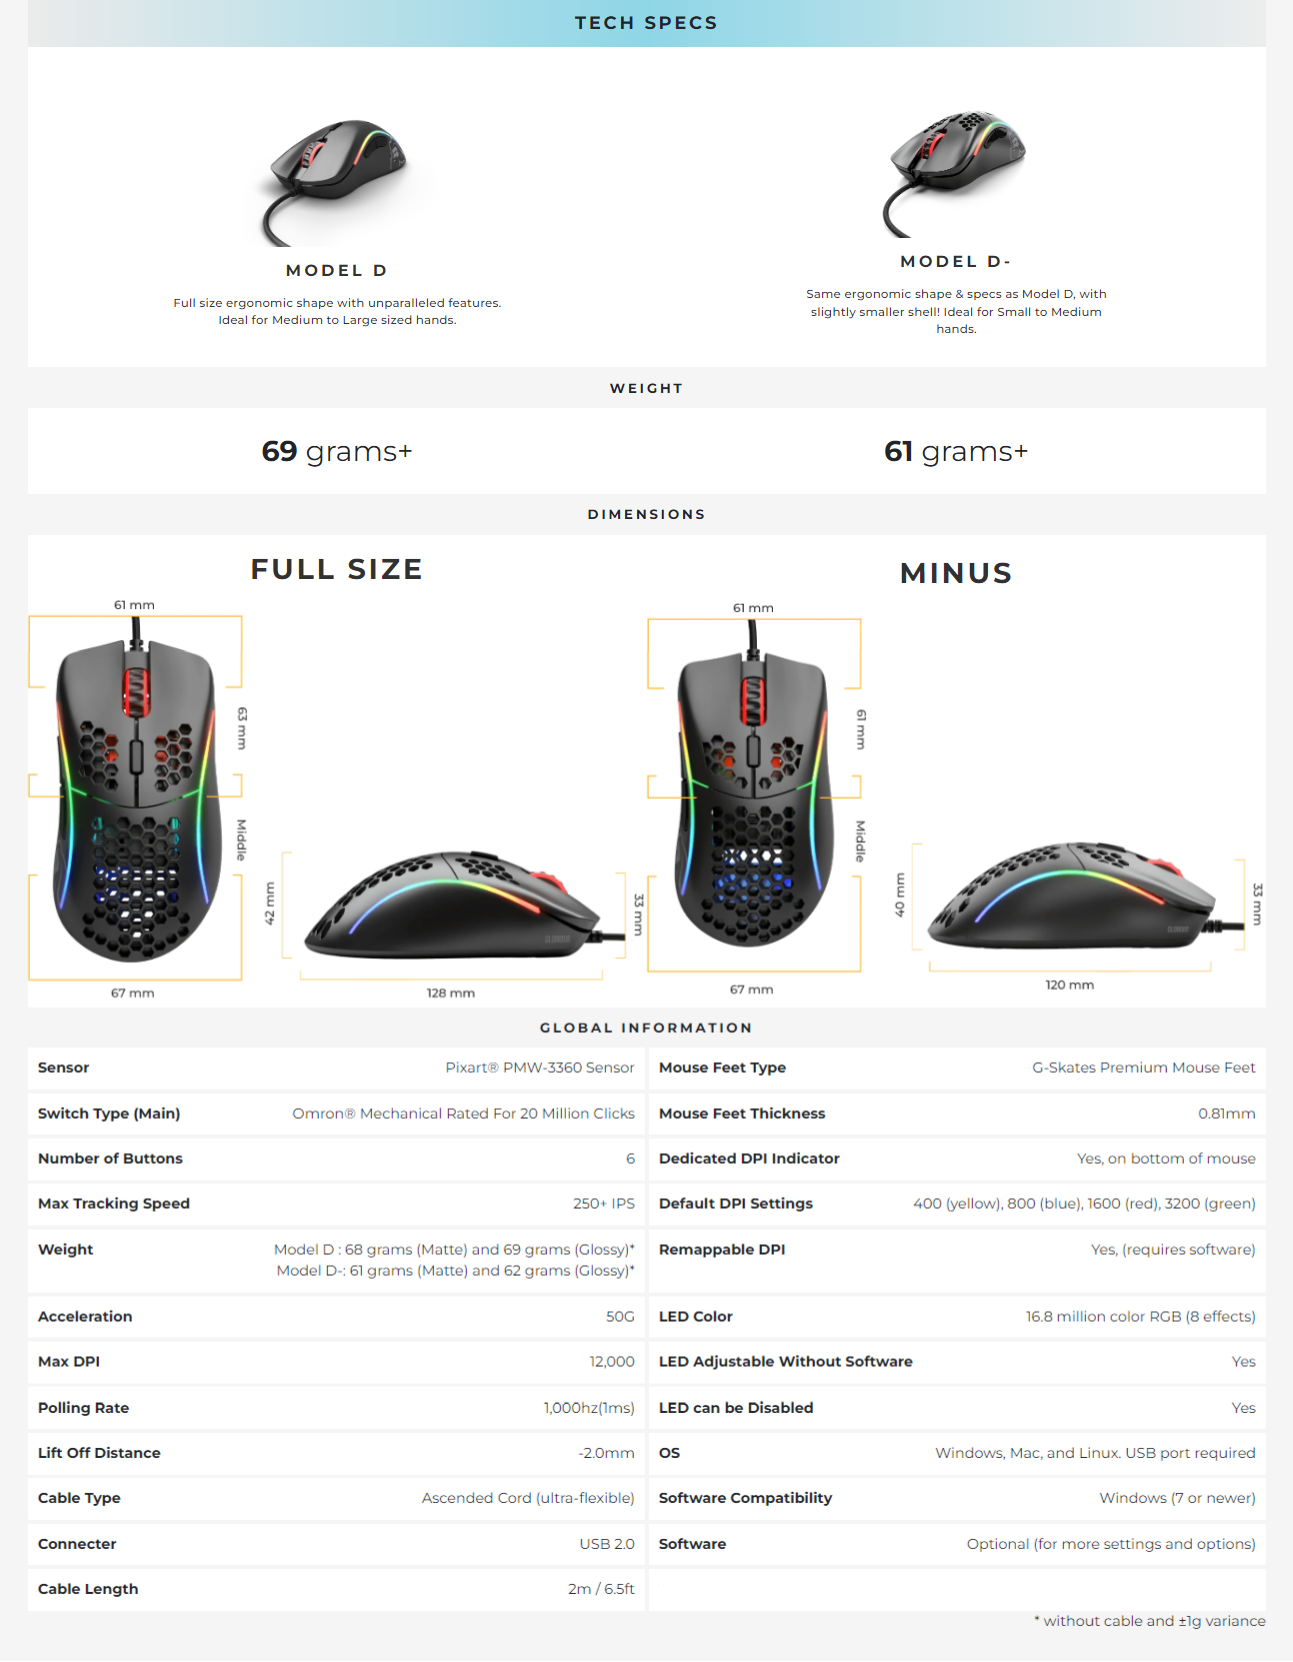 A large marketing image providing additional information about the product Glorious Model D Wired Gaming Mouse - Glossy Black - Additional alt info not provided